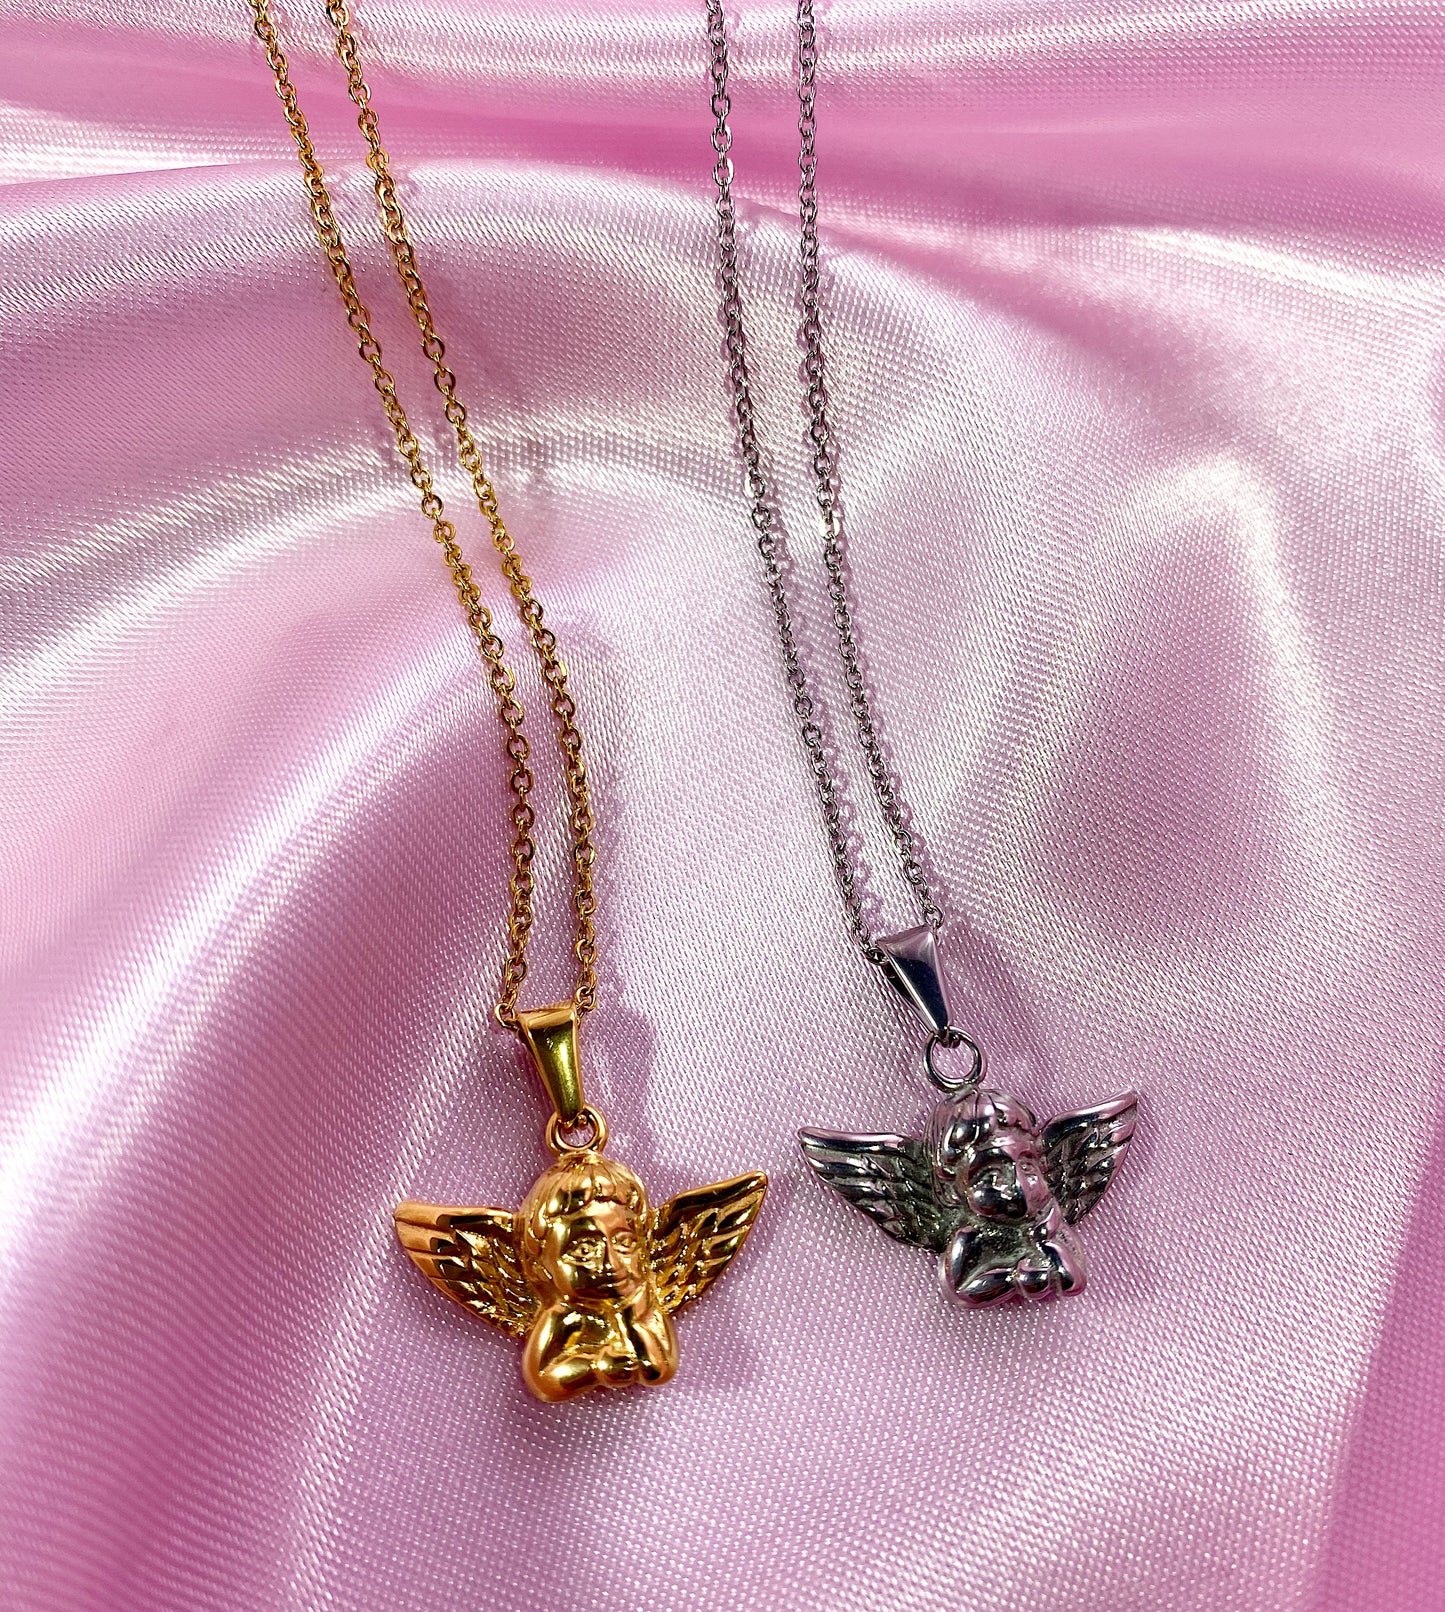 "Angel baby" necklace